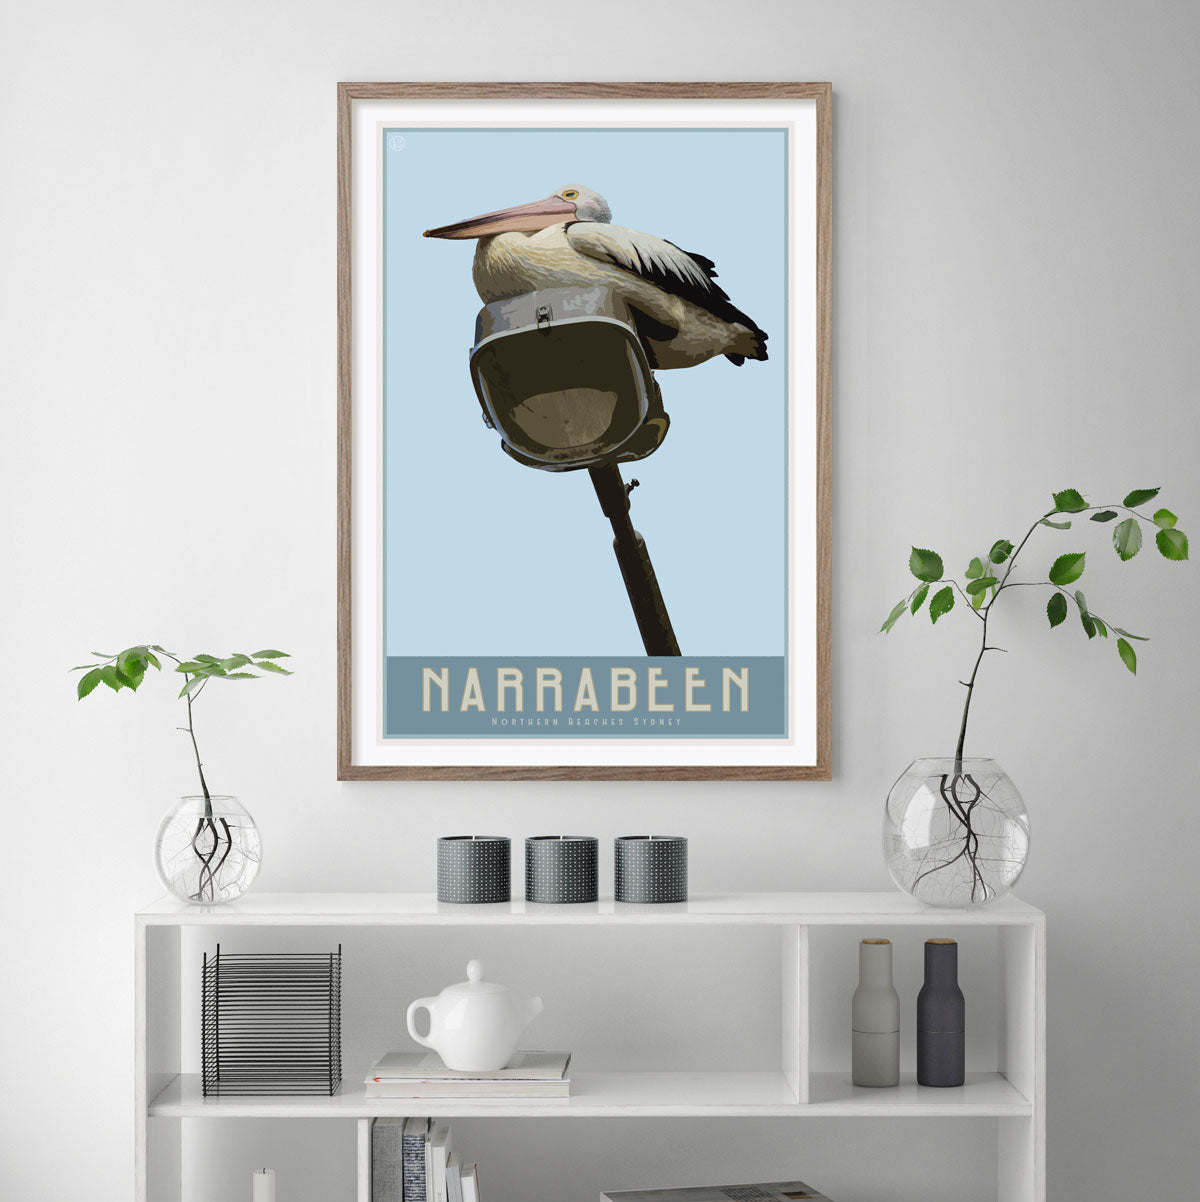 Narrabeen vintage travel retro print by places we luv